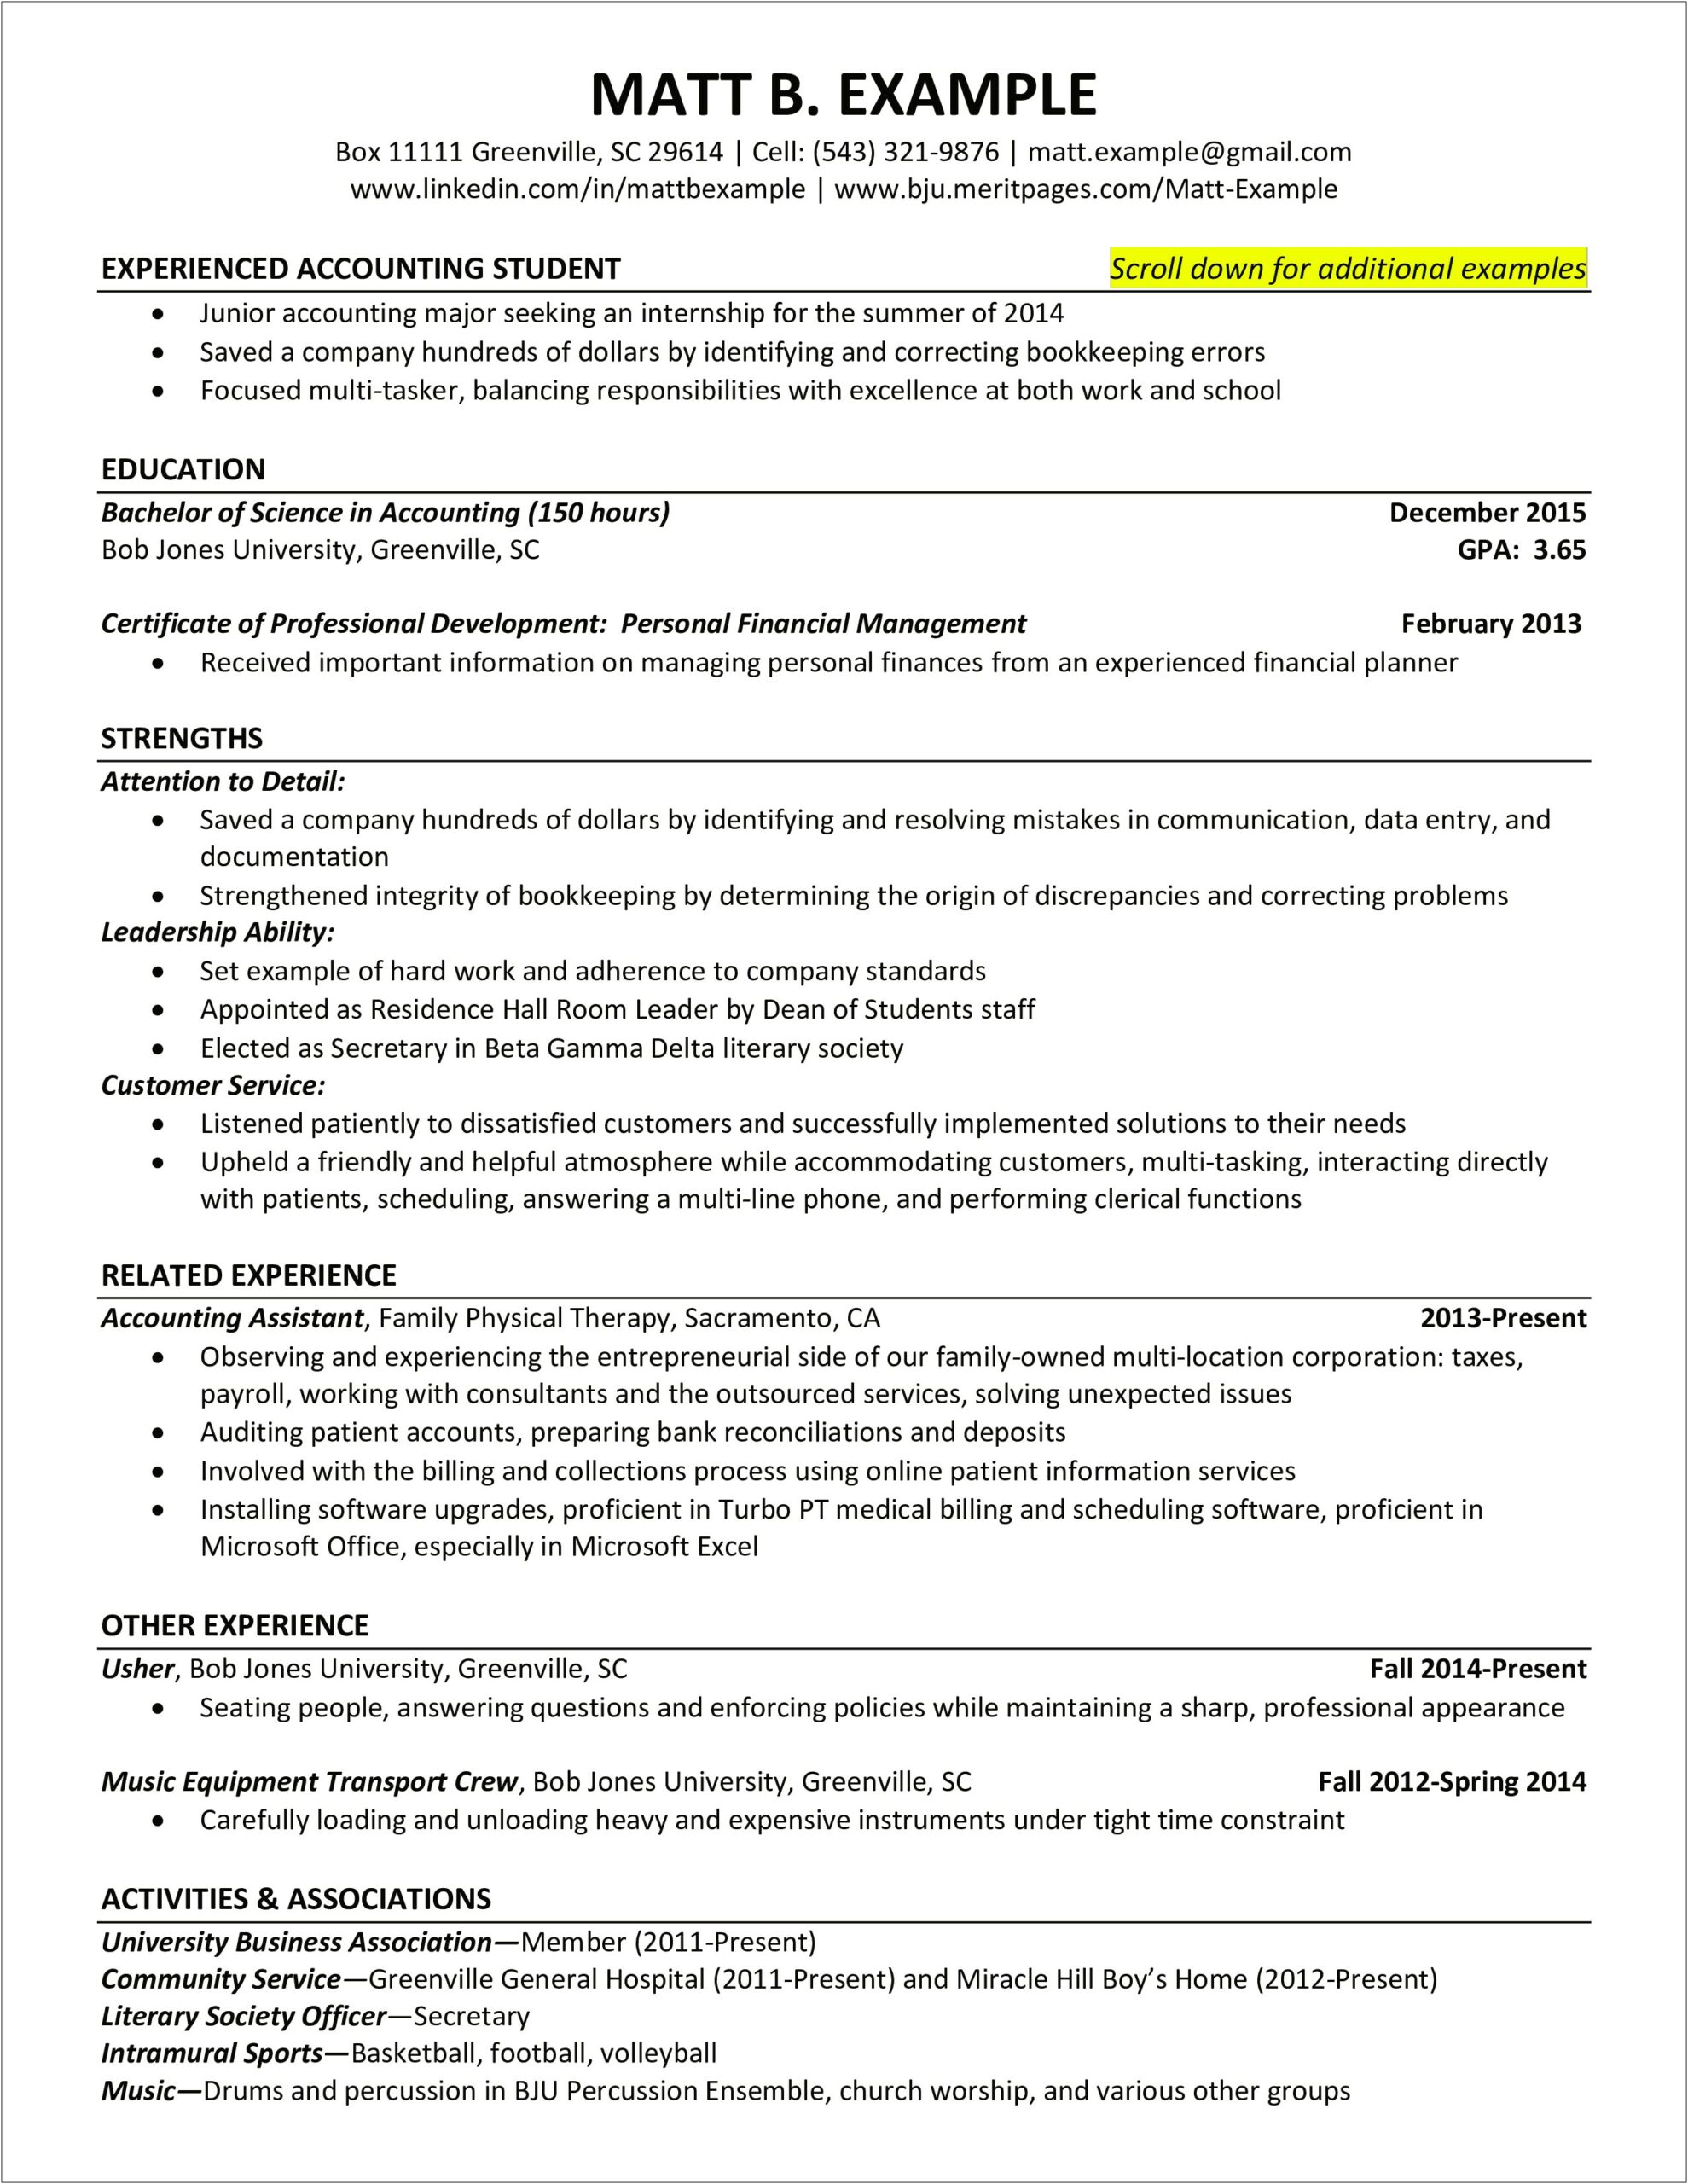 Description Of Education In Resume Accounting